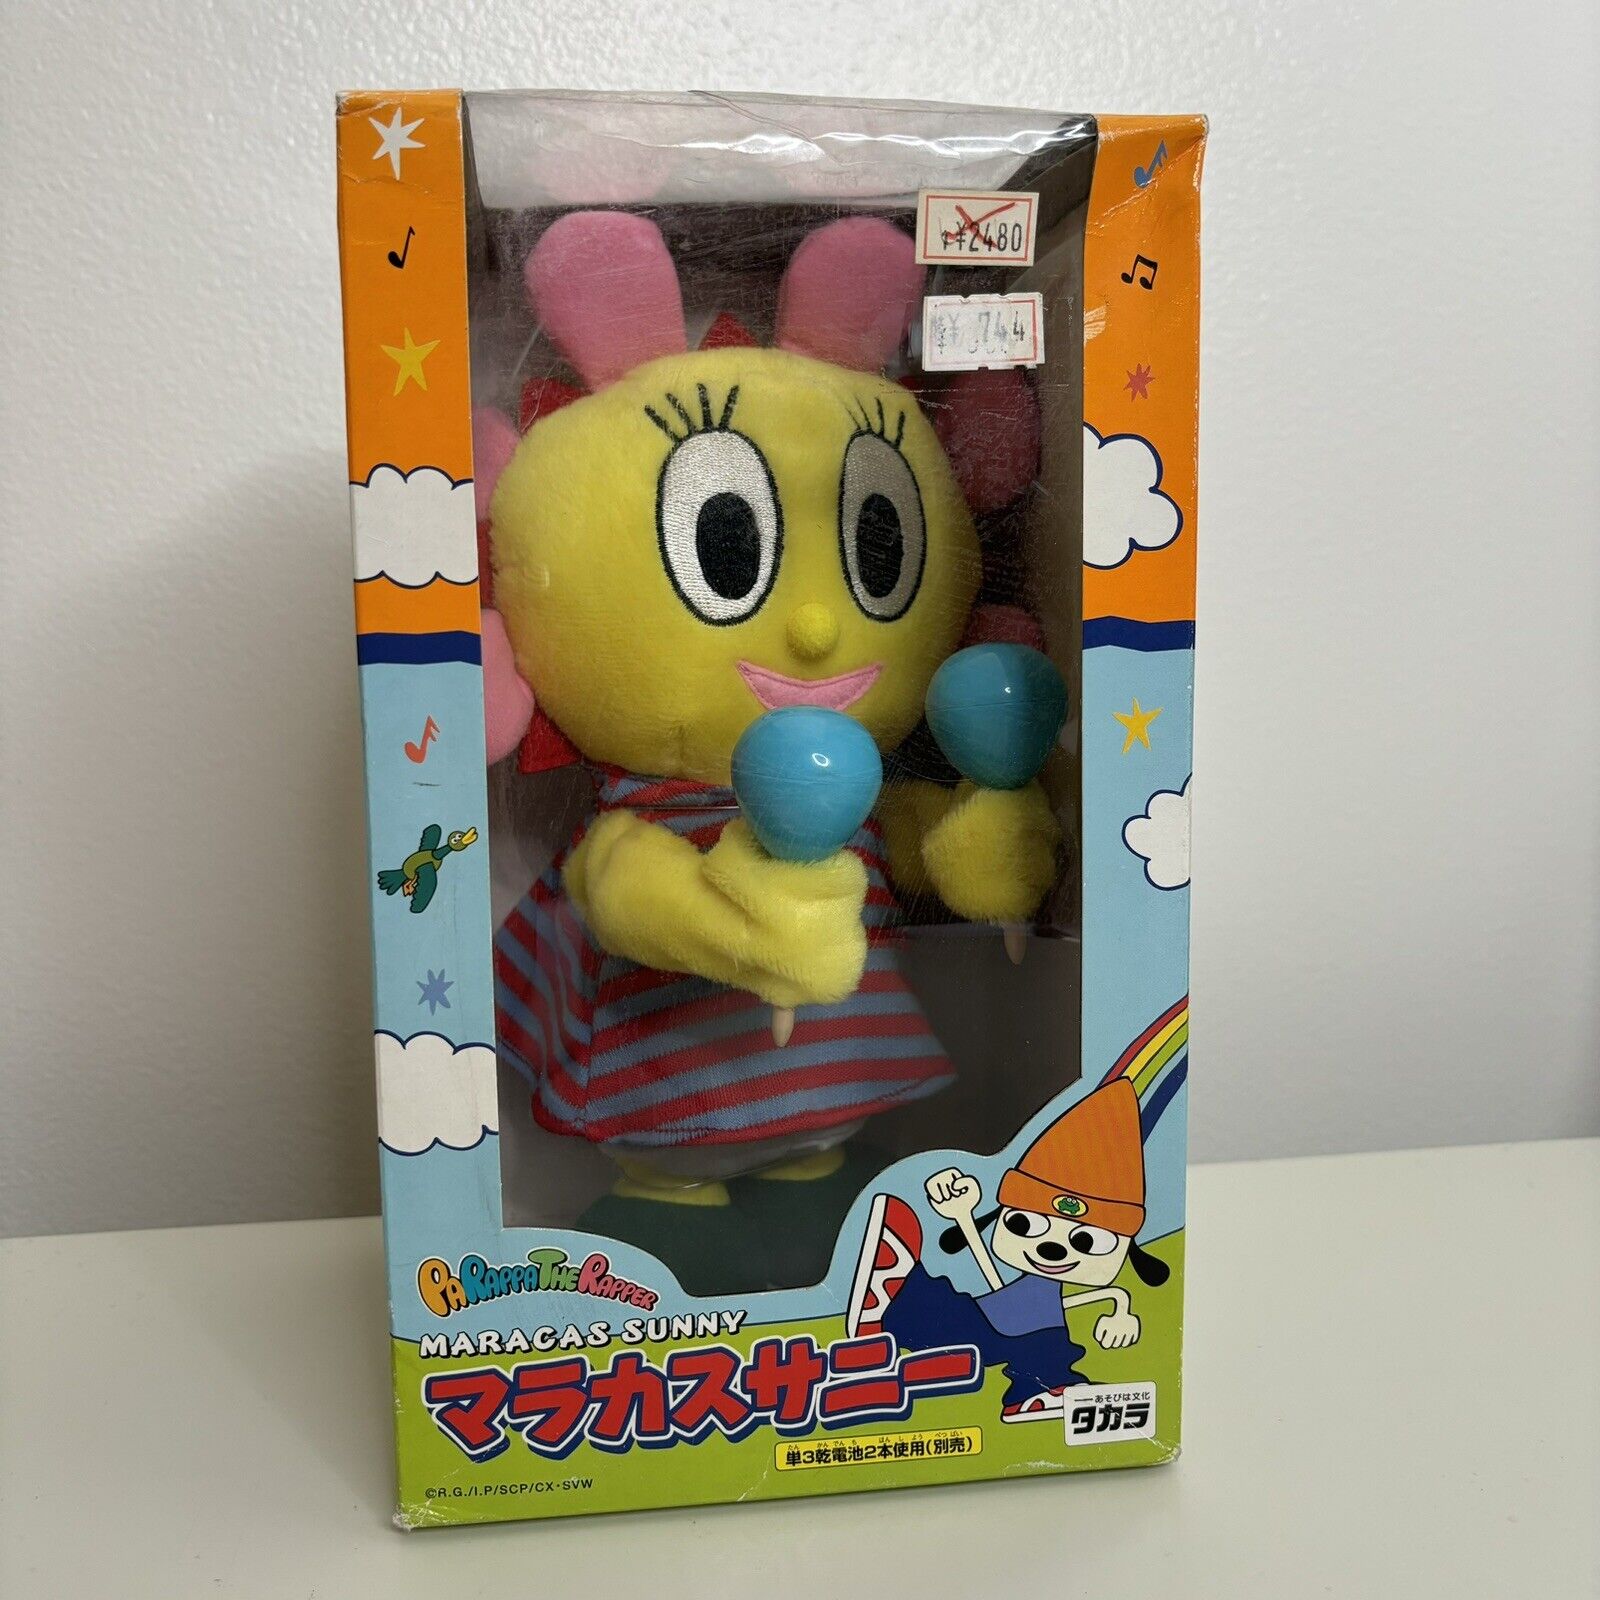 PaRappa the Rapper Maracas Sunny  set Game Characters TAKARA Plush Toy Doll